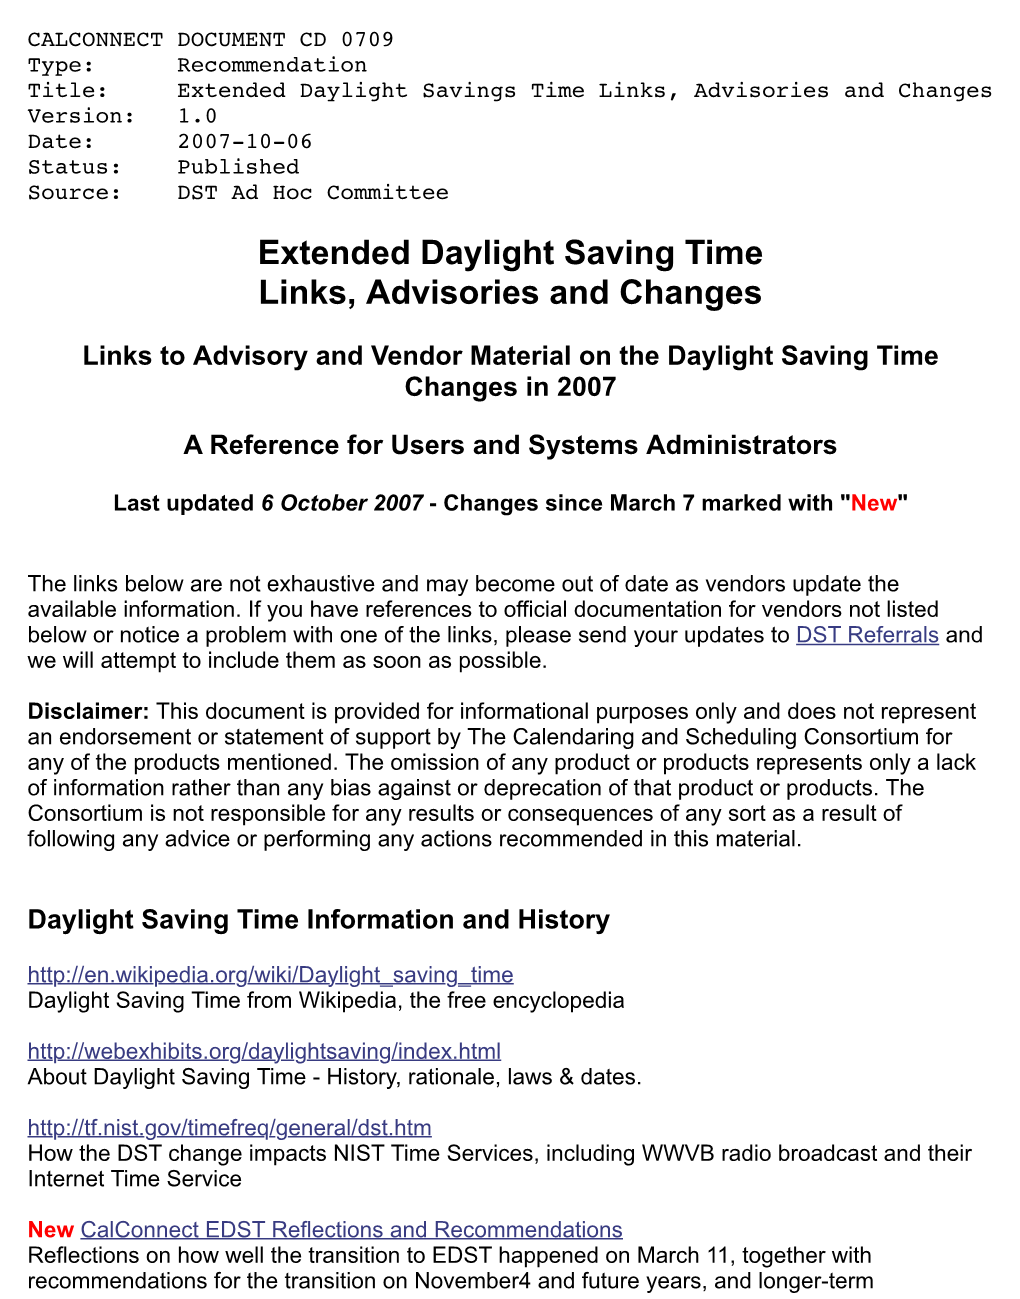 Extended Daylight Saving Time Links, Advisories and Changes